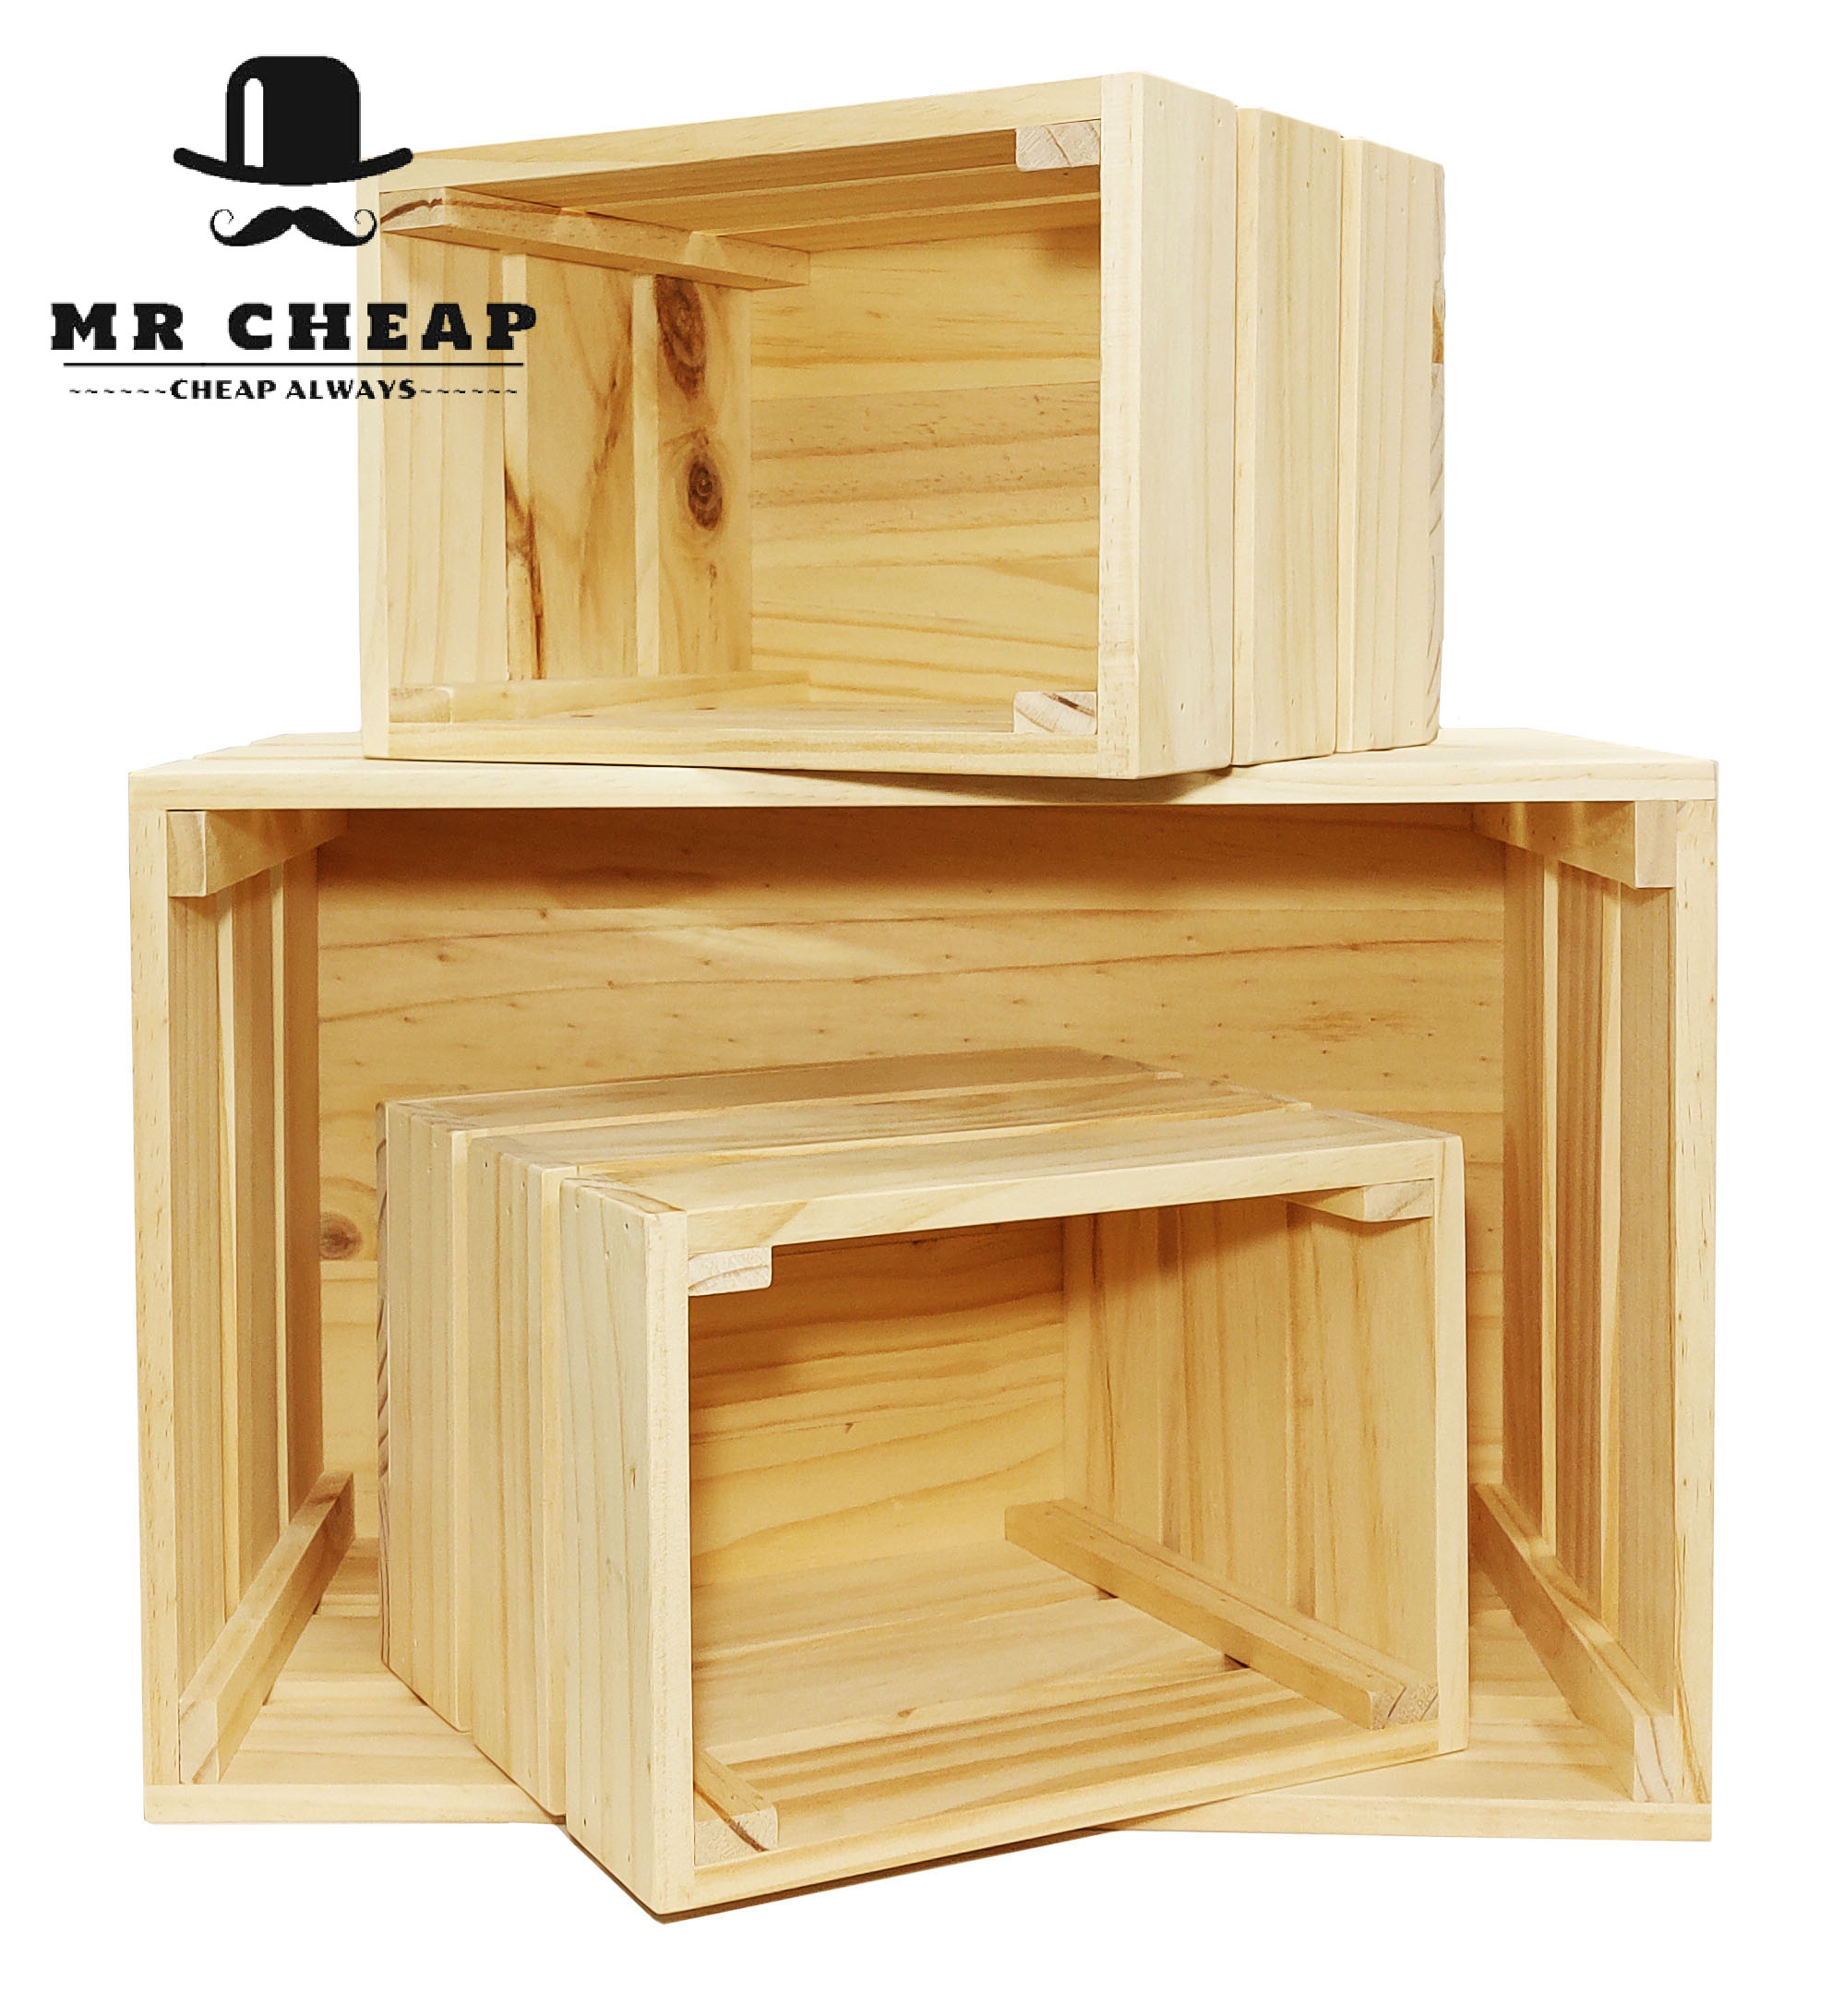  | Mr Cheap - Customize Wood Products Specialist